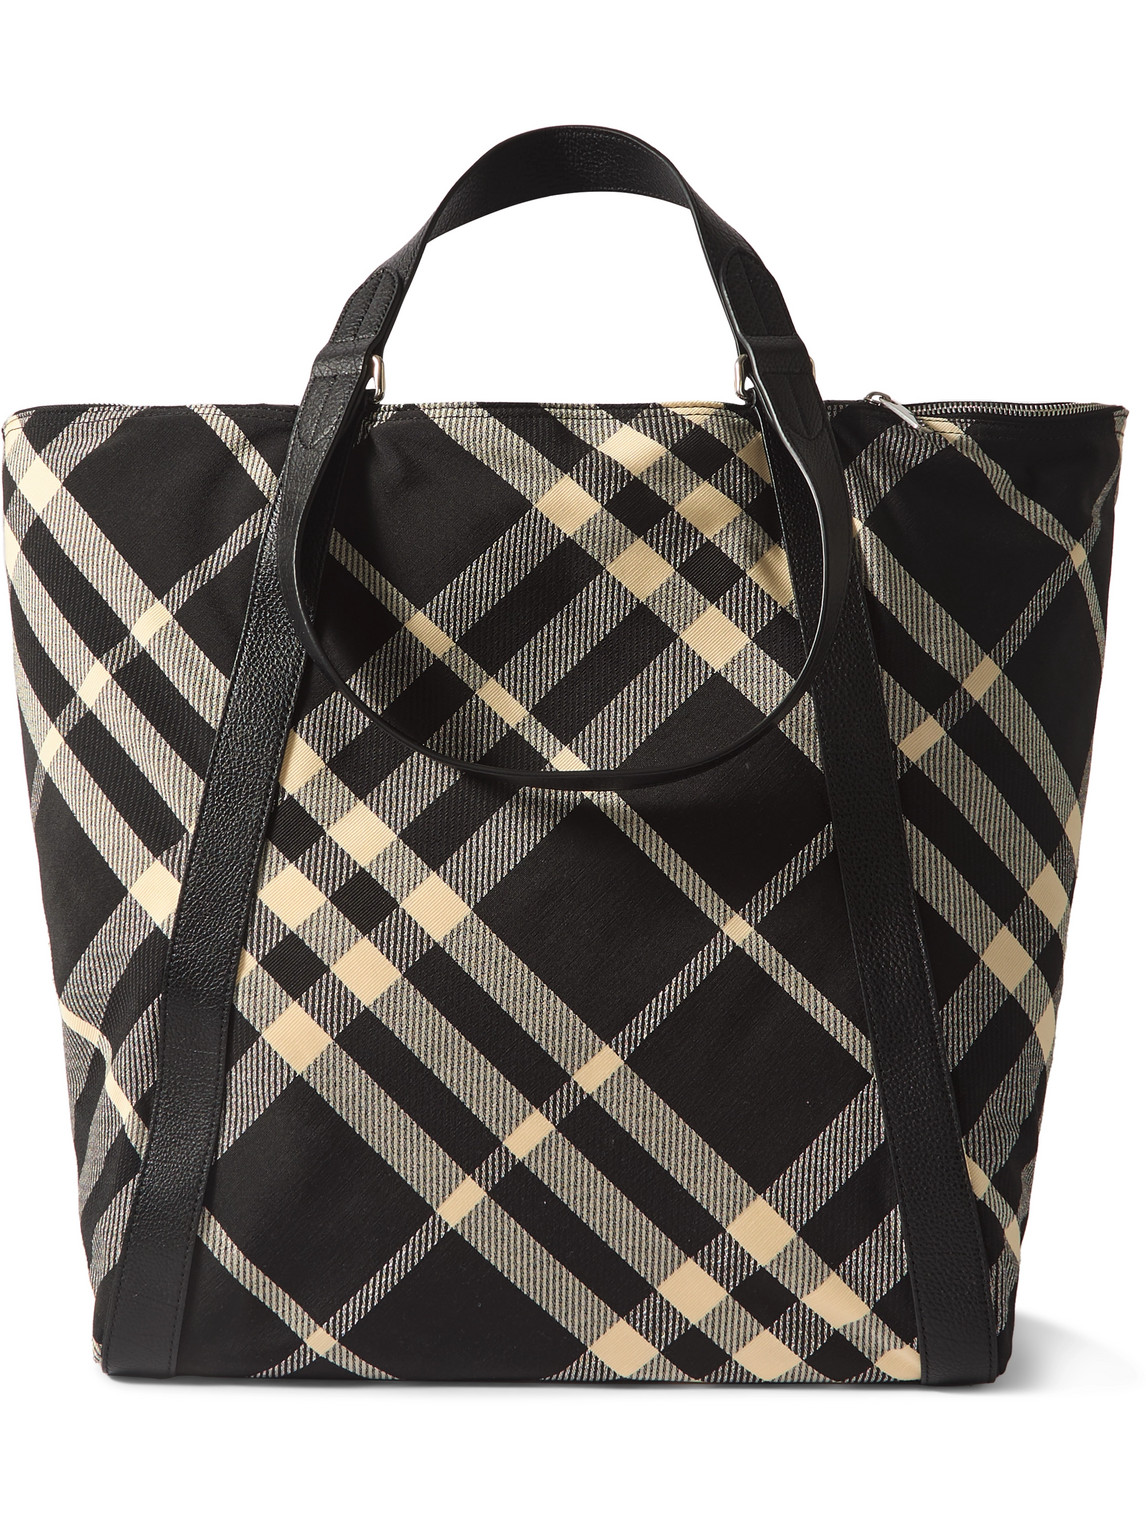 Large Leather-Trimmed Checked Jacquard Tote Bag